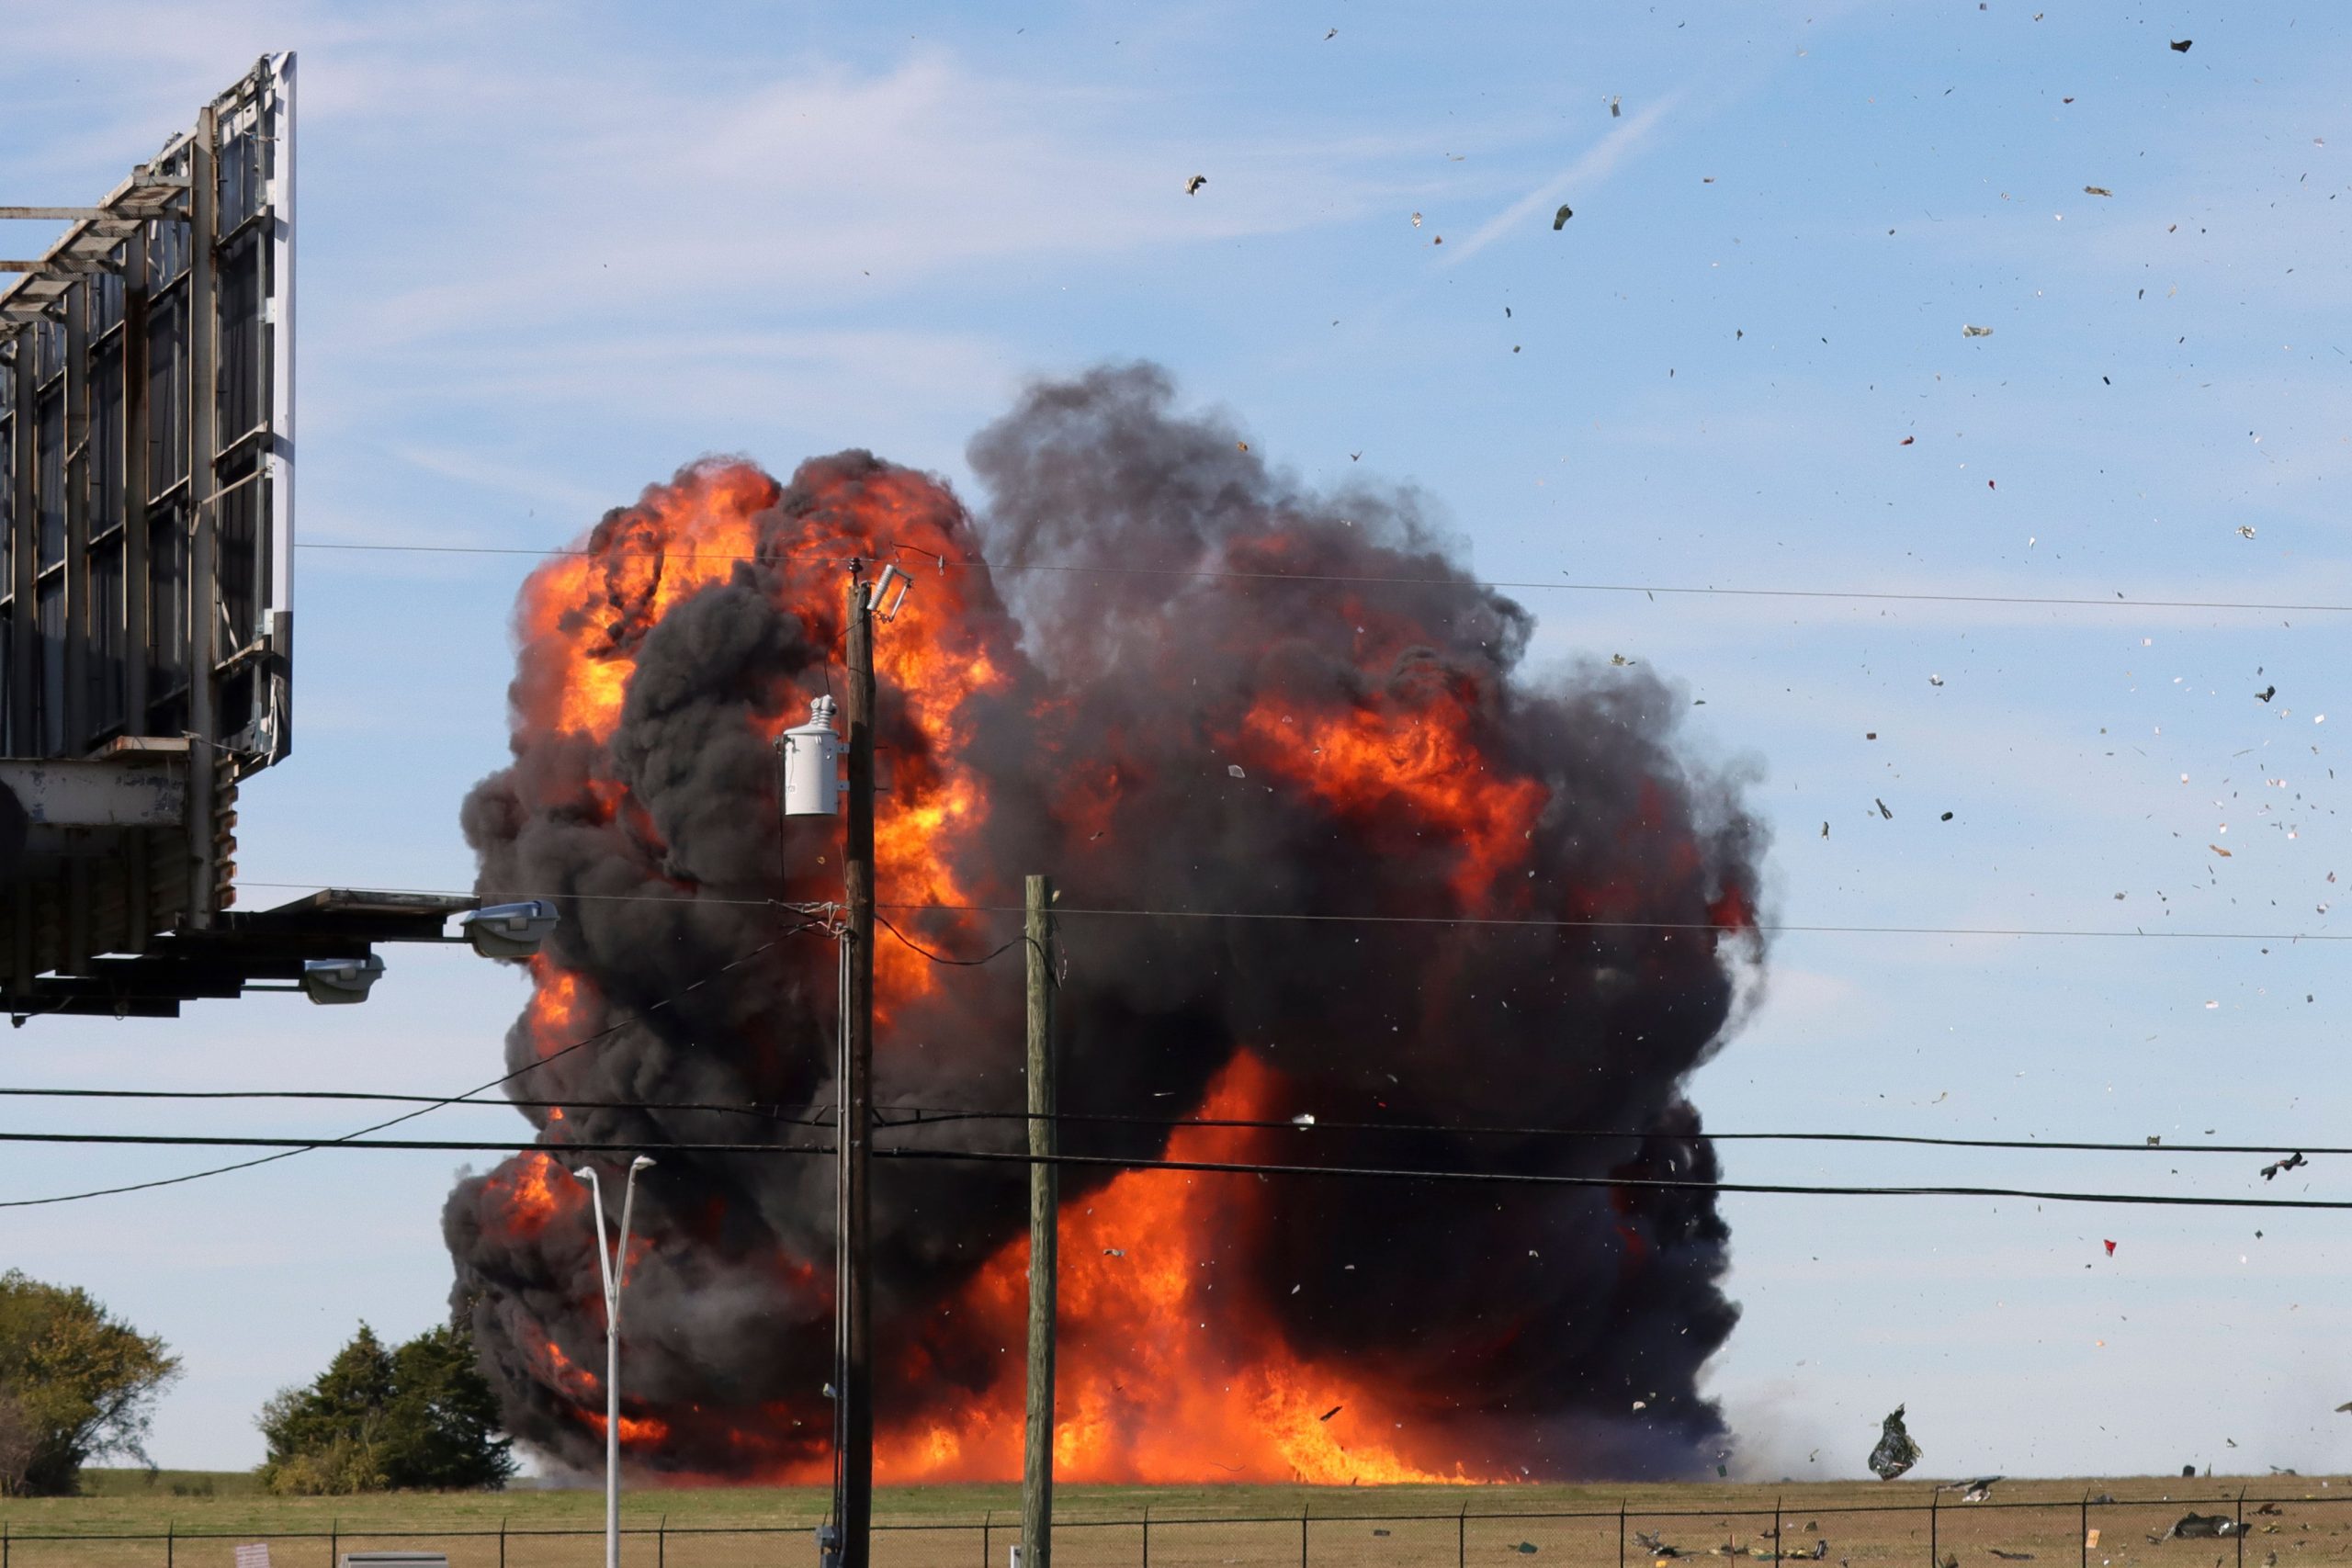 Dallas air show plane crash: 6 people believed to be on board